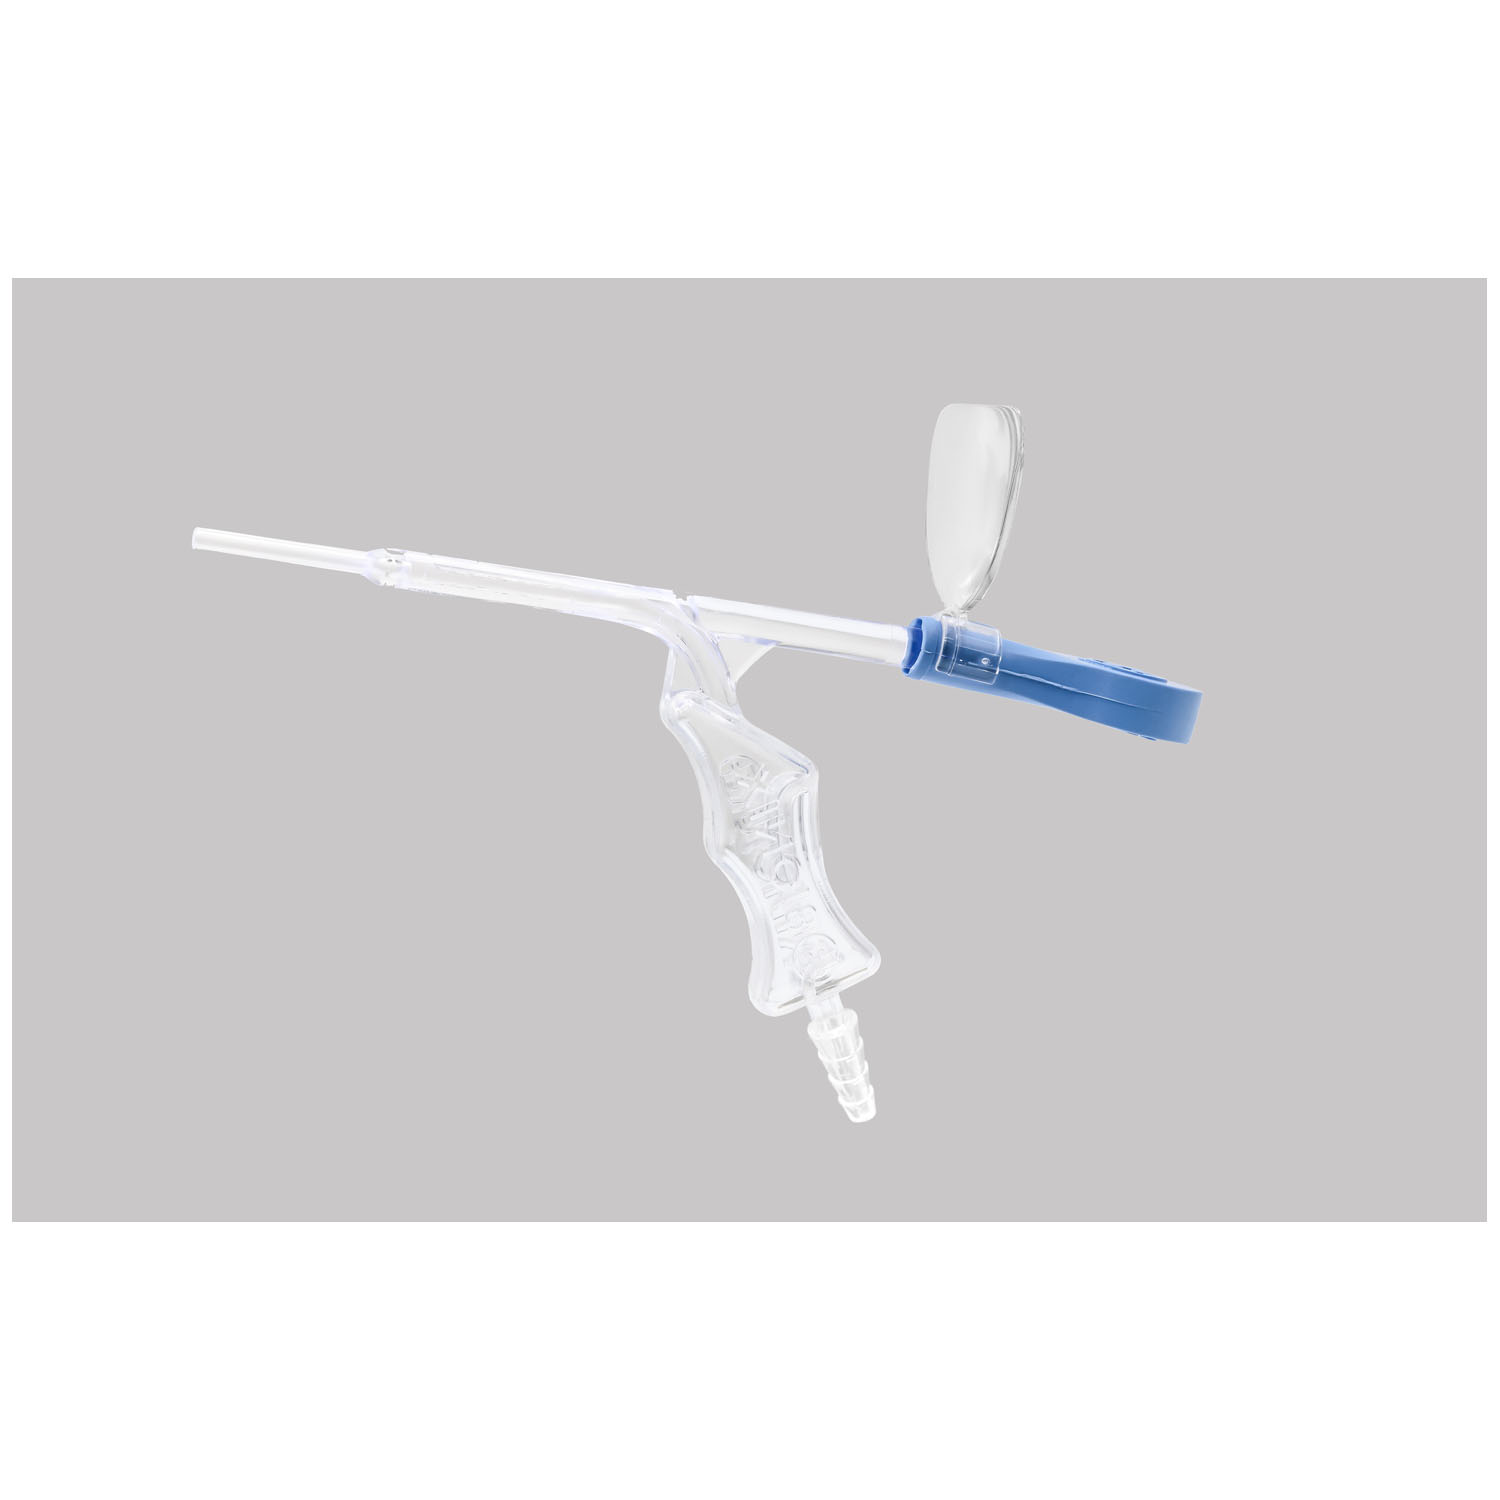 BIONIX LIGHTED SUCTION FOR CERUMEN REMOVAL : 2625 BX                       $148.38 Stocked